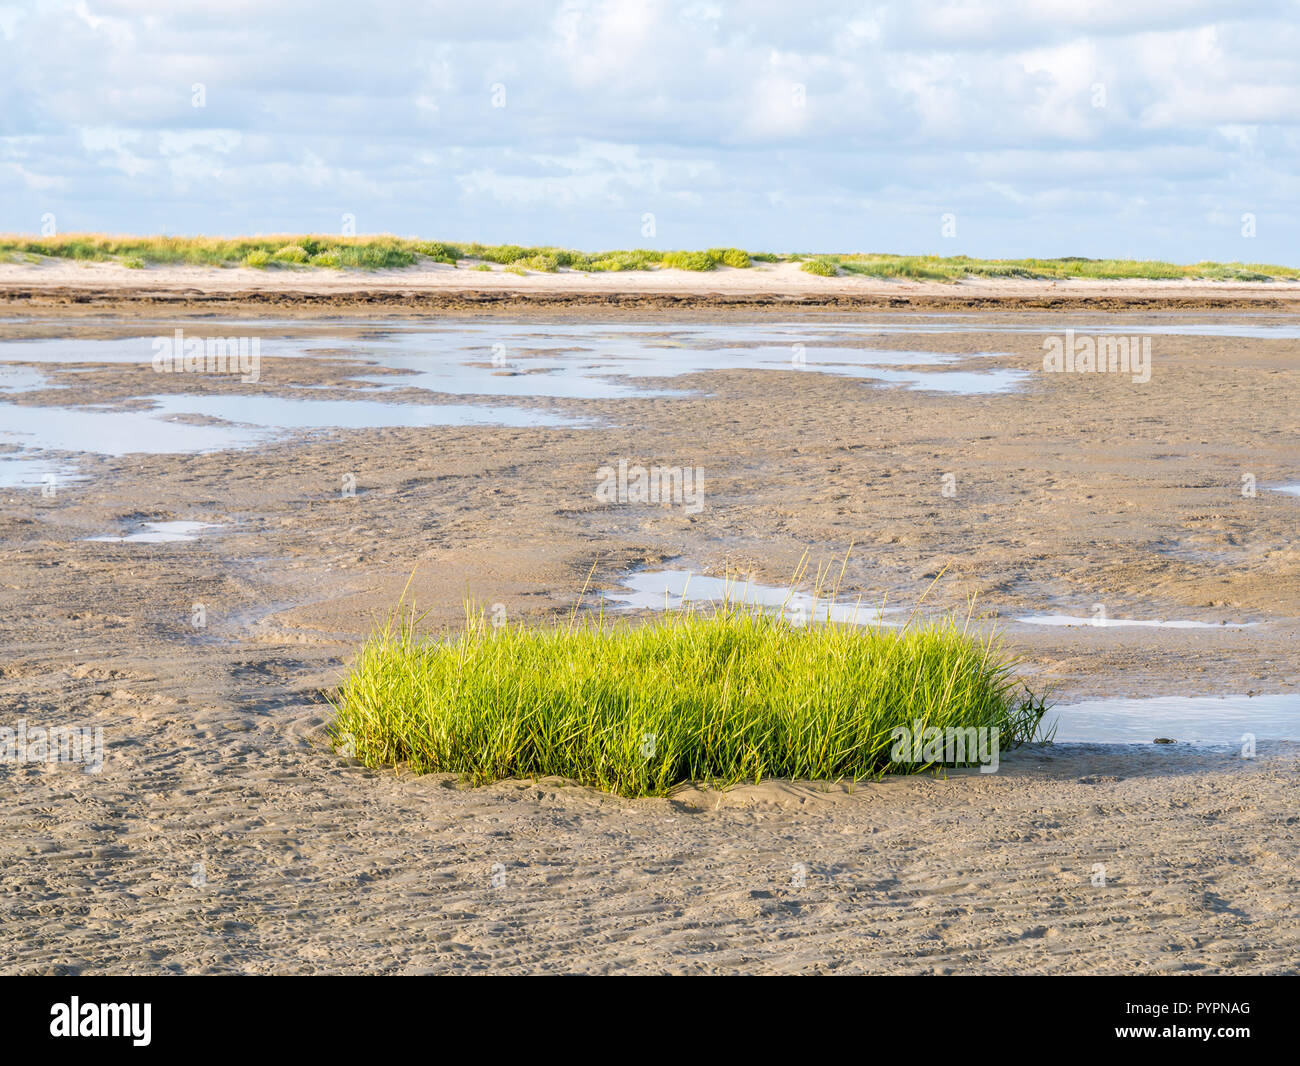 Sod of common cordgrass, Spartina anglica, growing on tidal flat near beach of nature reserve Boschplaat, Terschelling, Netherlands Stock Photo